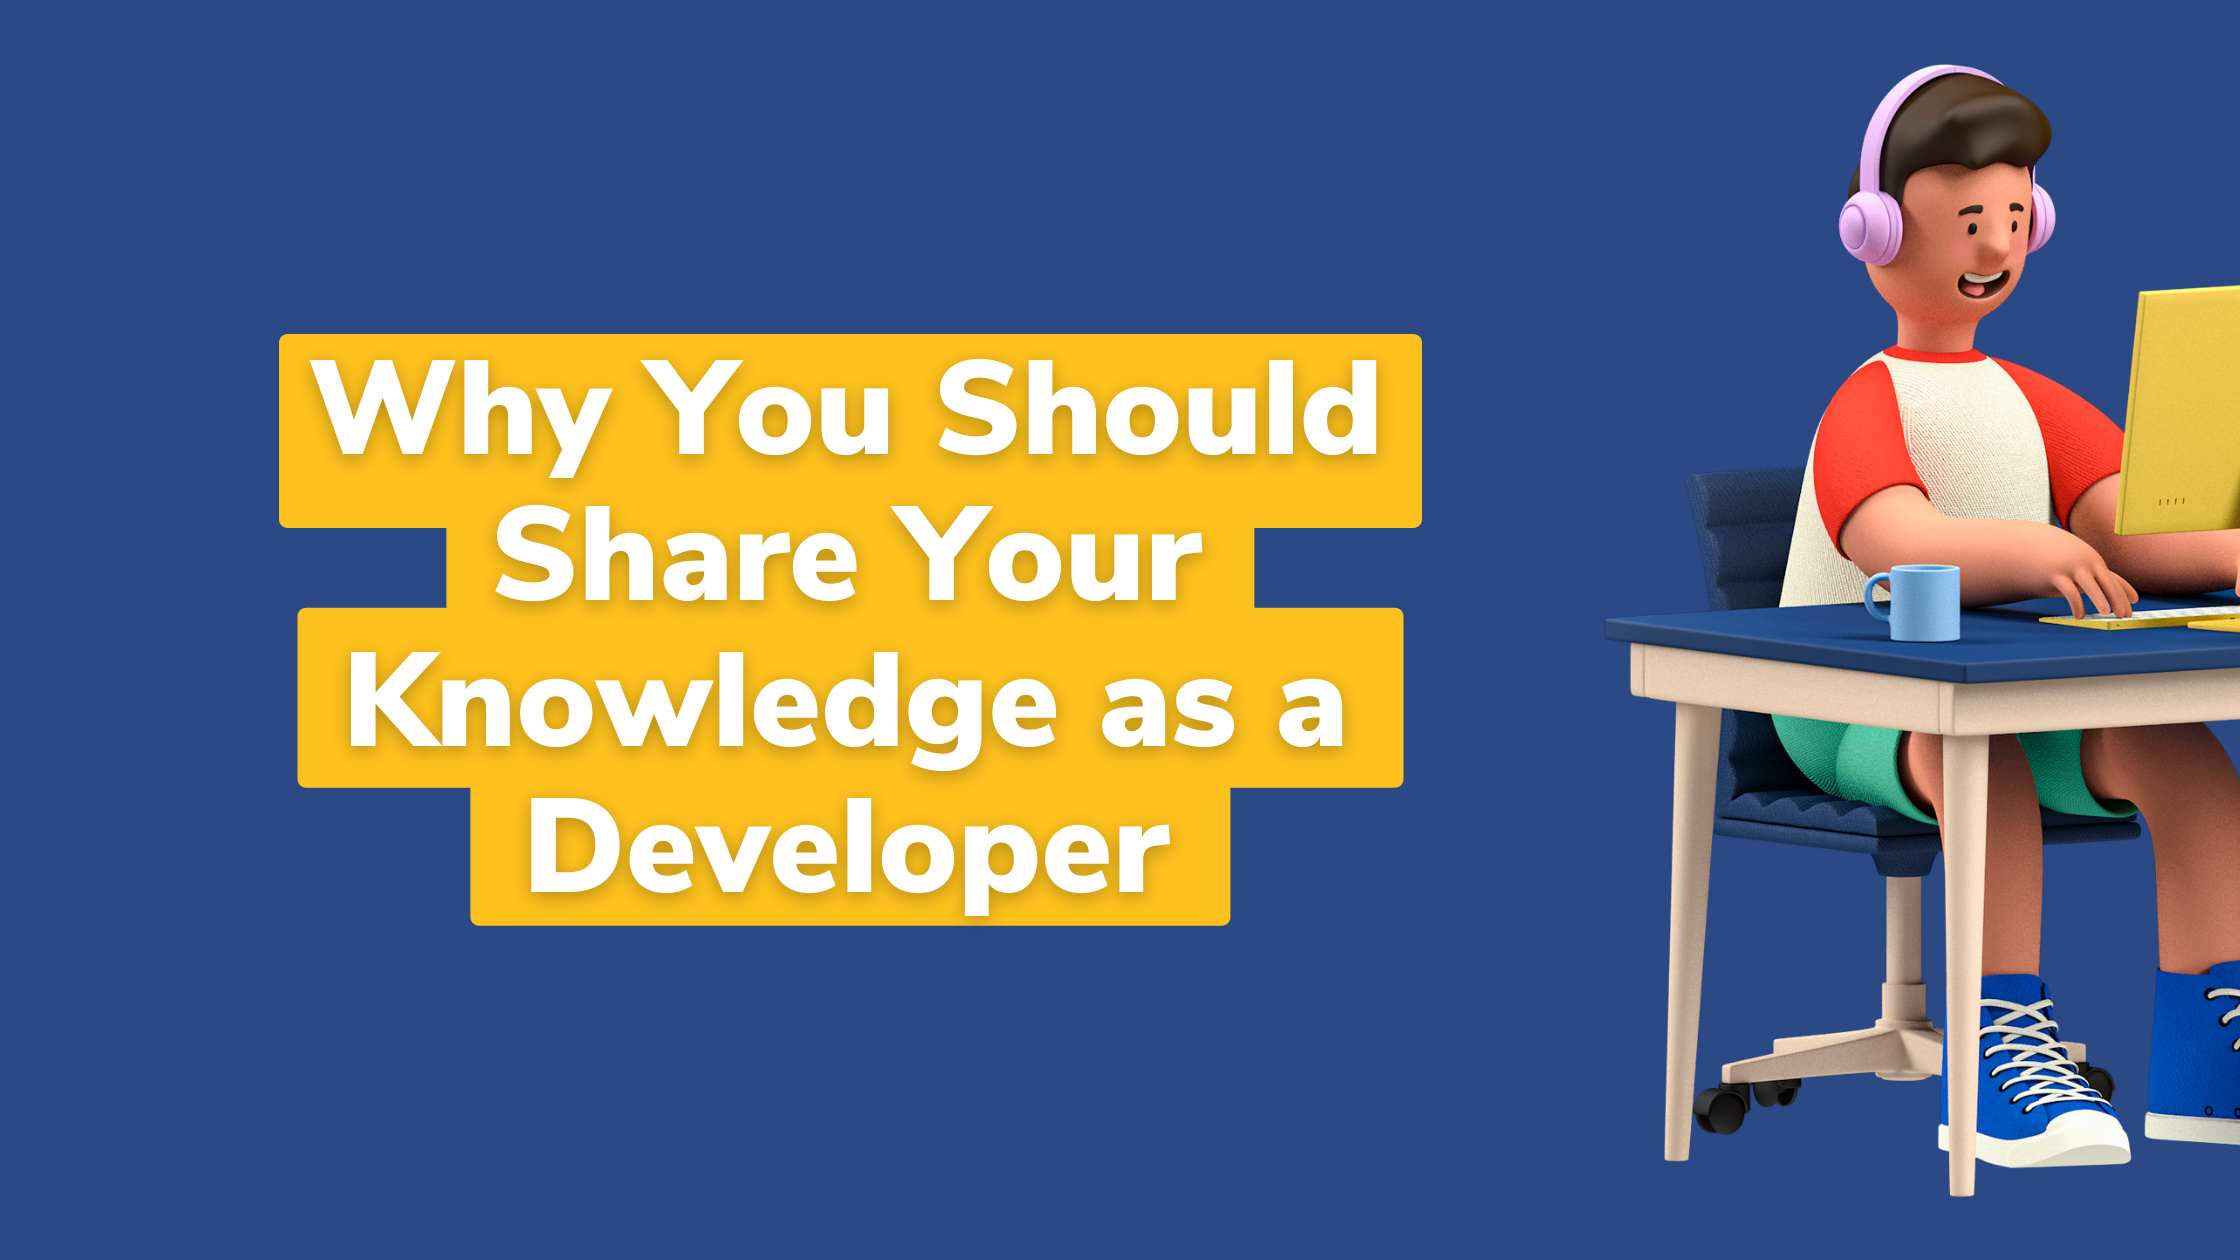 Why You Should Share Your Knowledge as a Developer